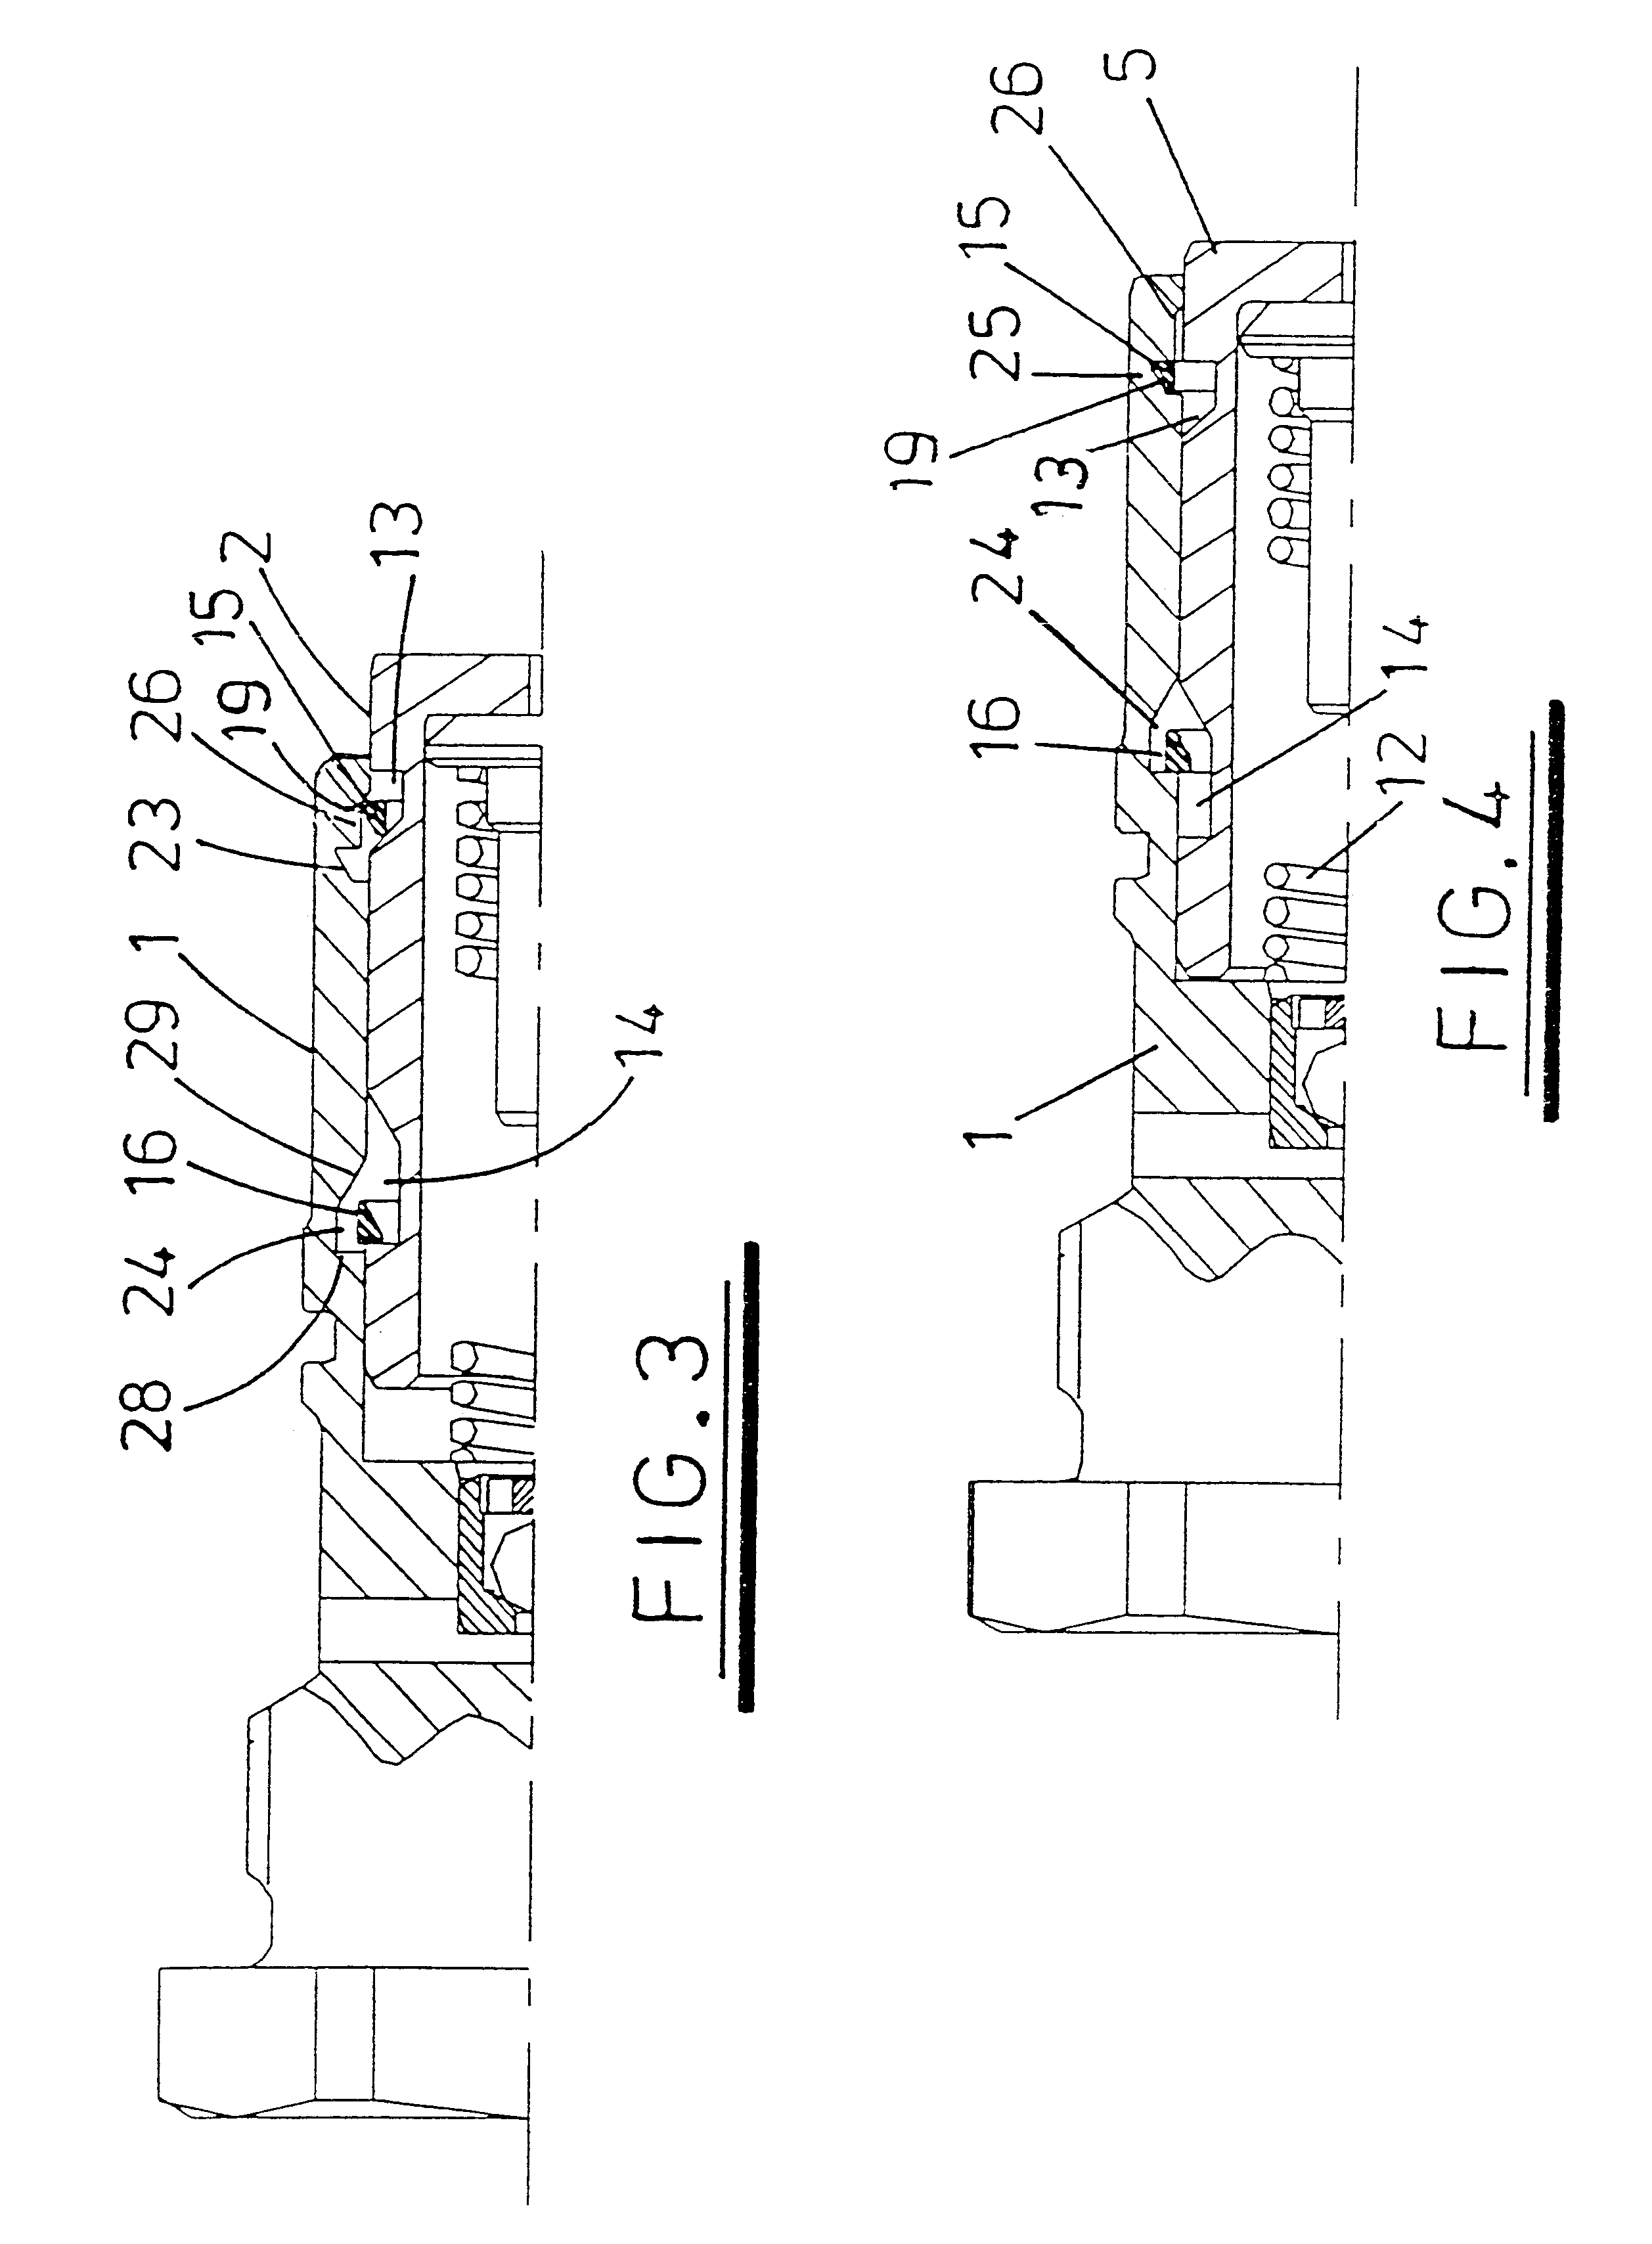 Tensioner for a chain or belt